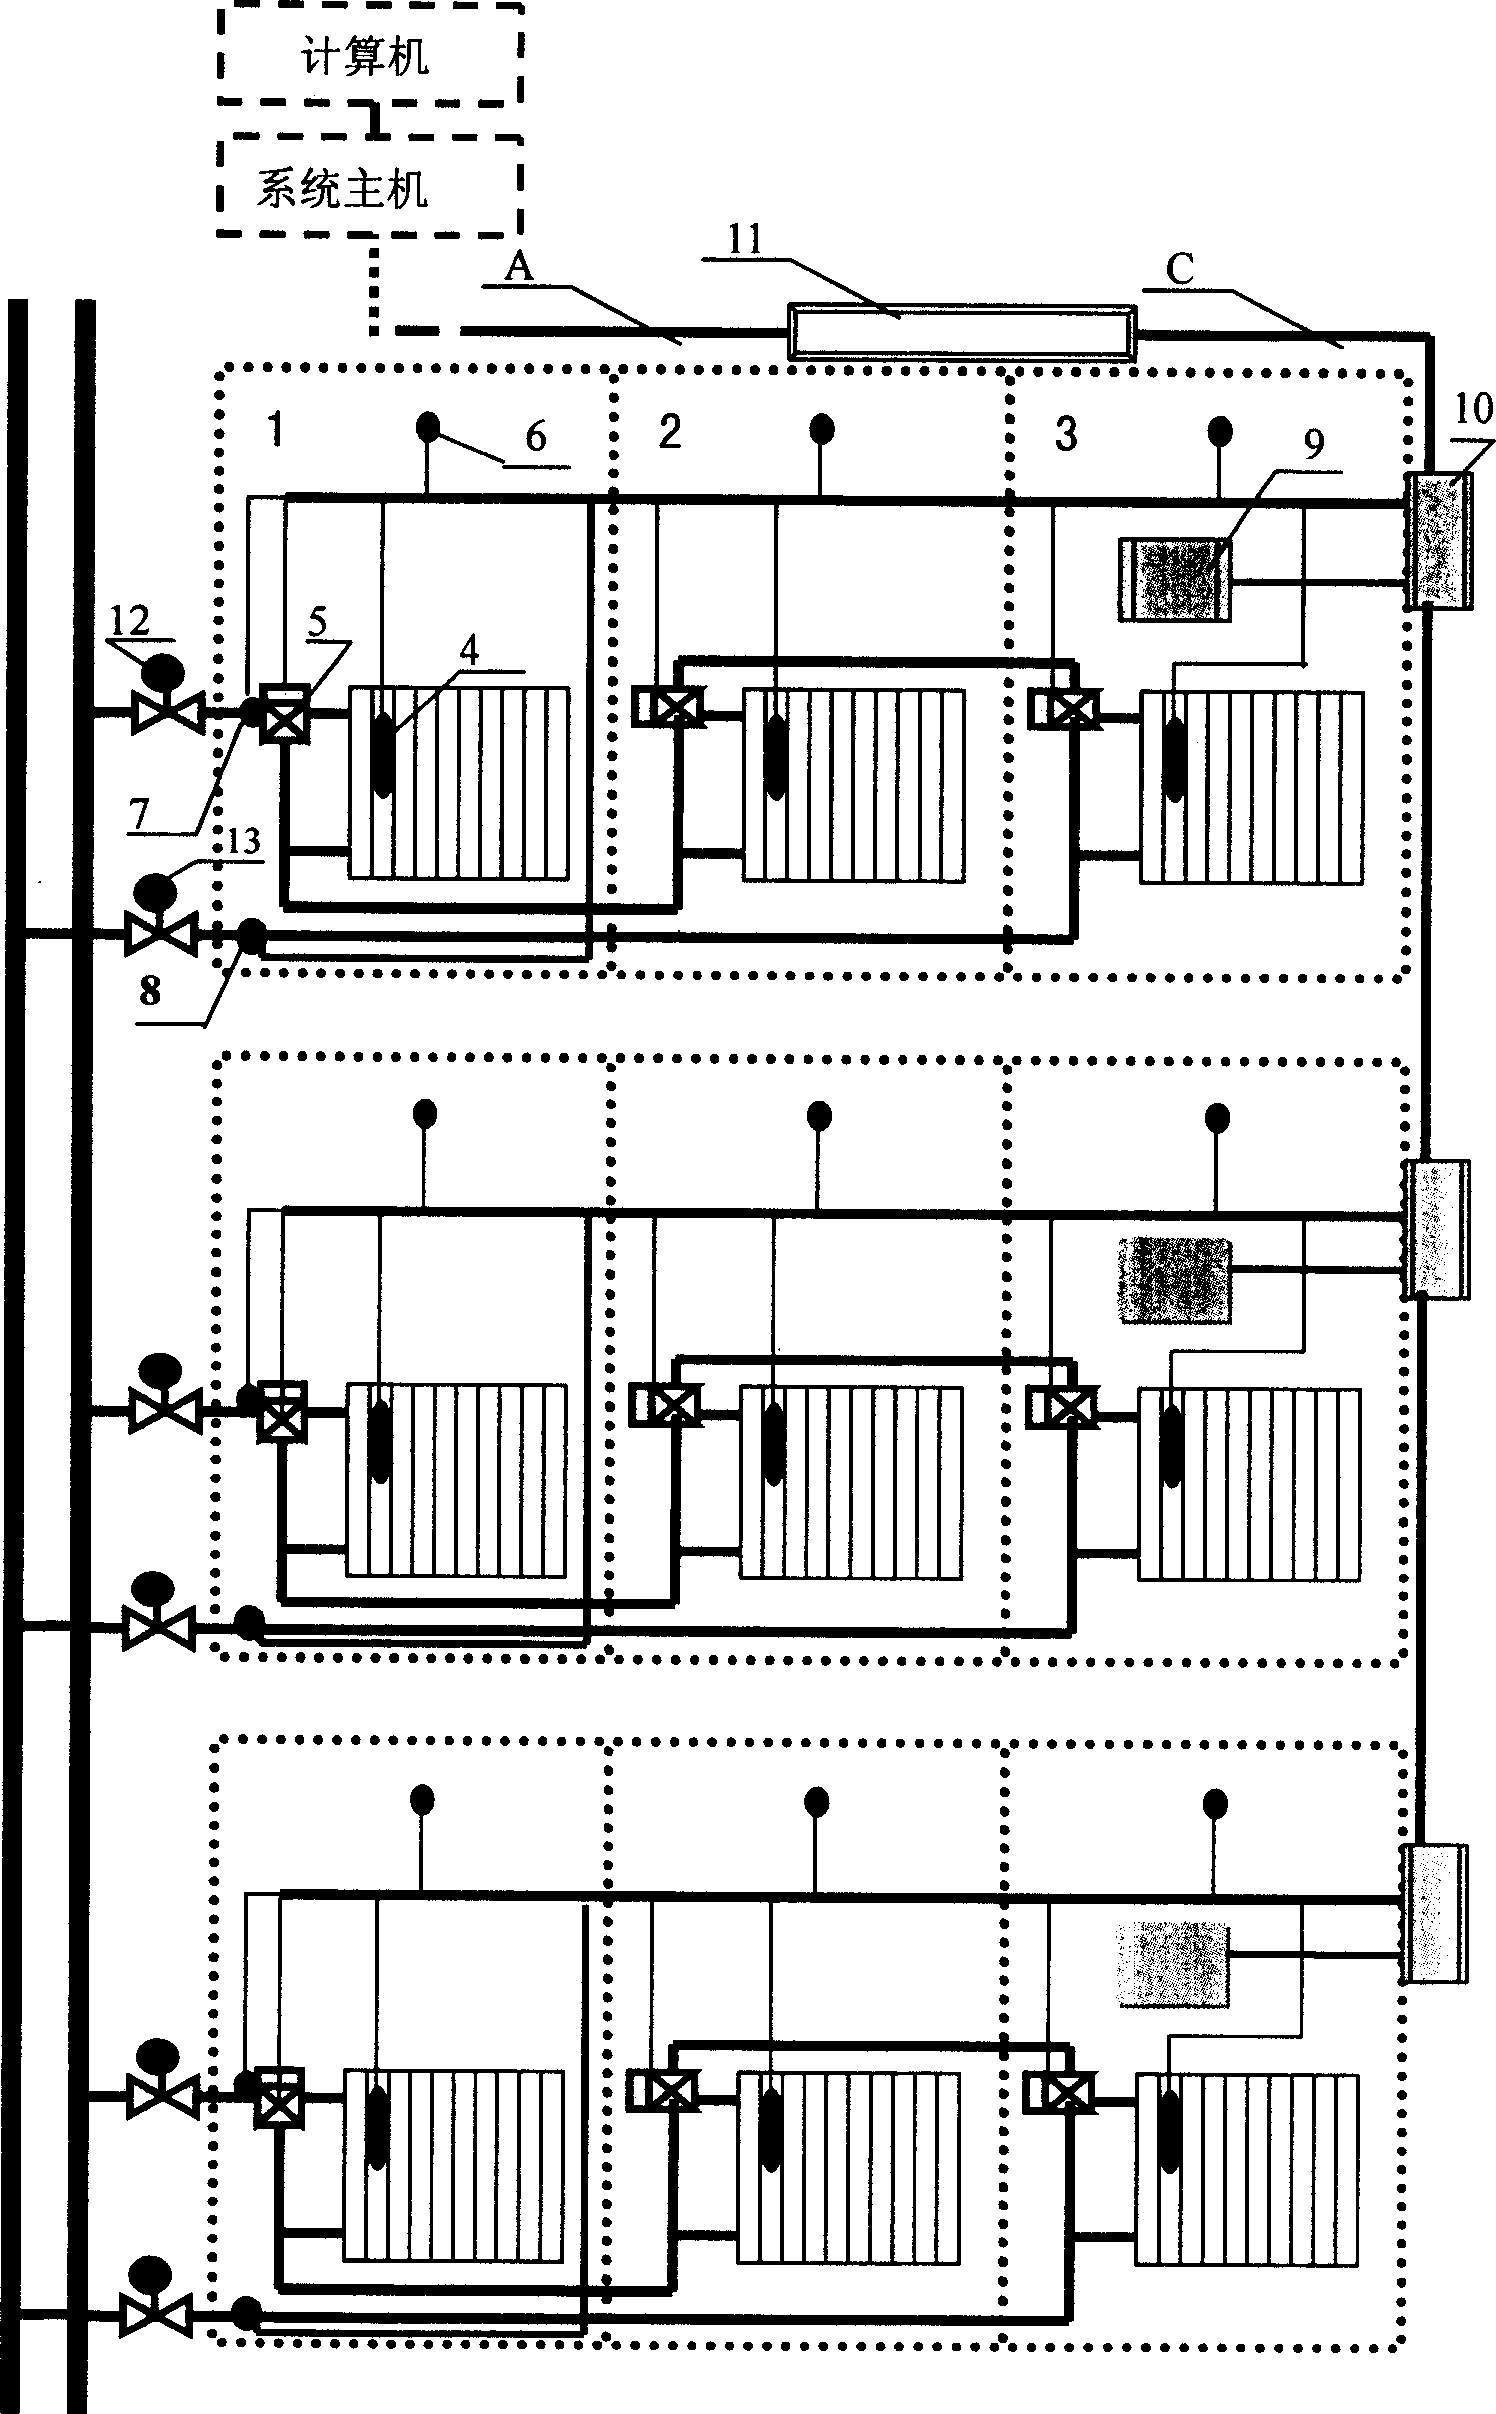 Computer management and control system for household heating